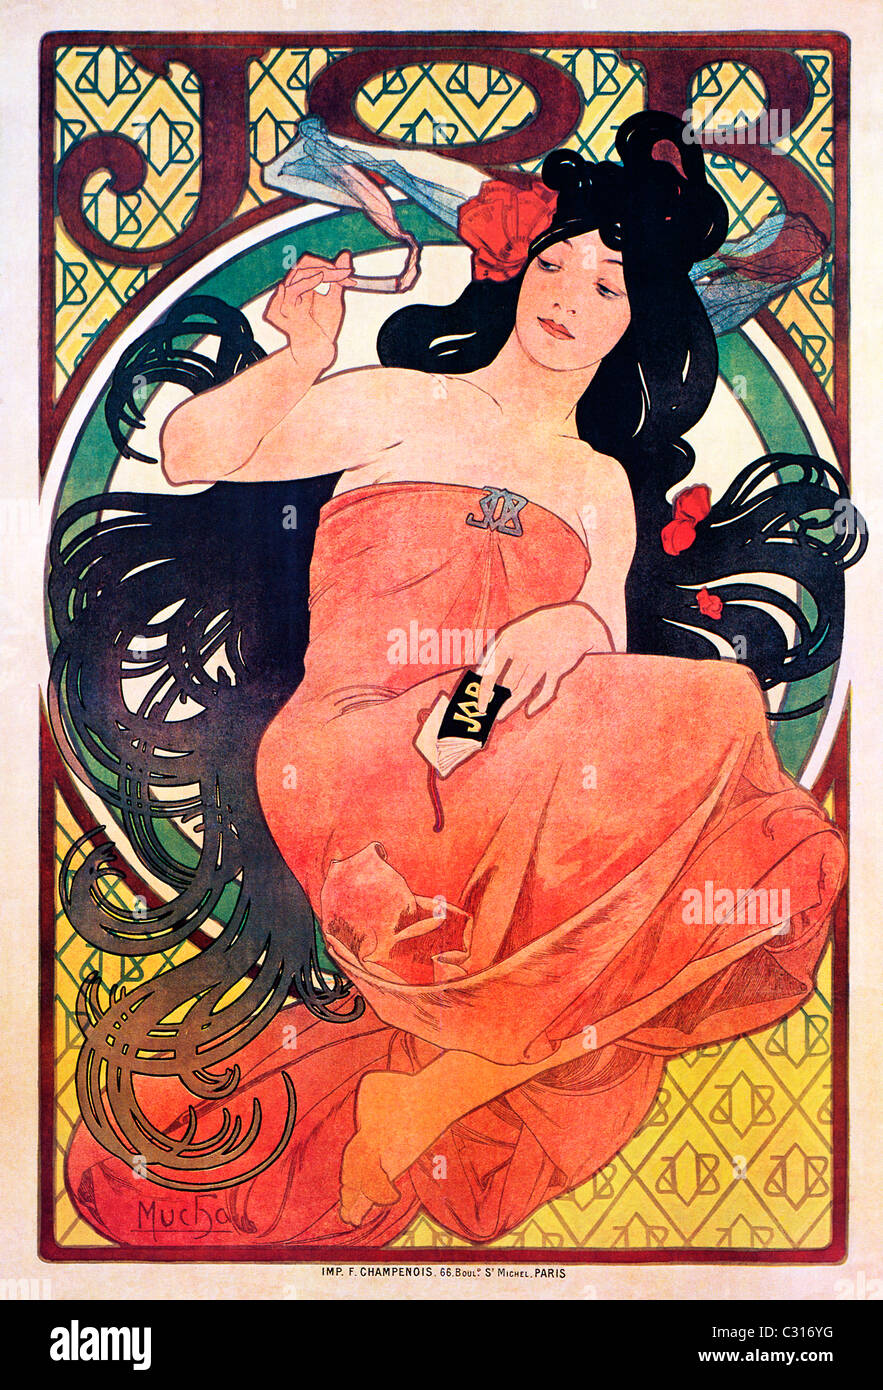 Mucha, Job, 1898 Art Nouveau poster by Alphonse Mucha for the French cigarette rolling papers Stock Photo